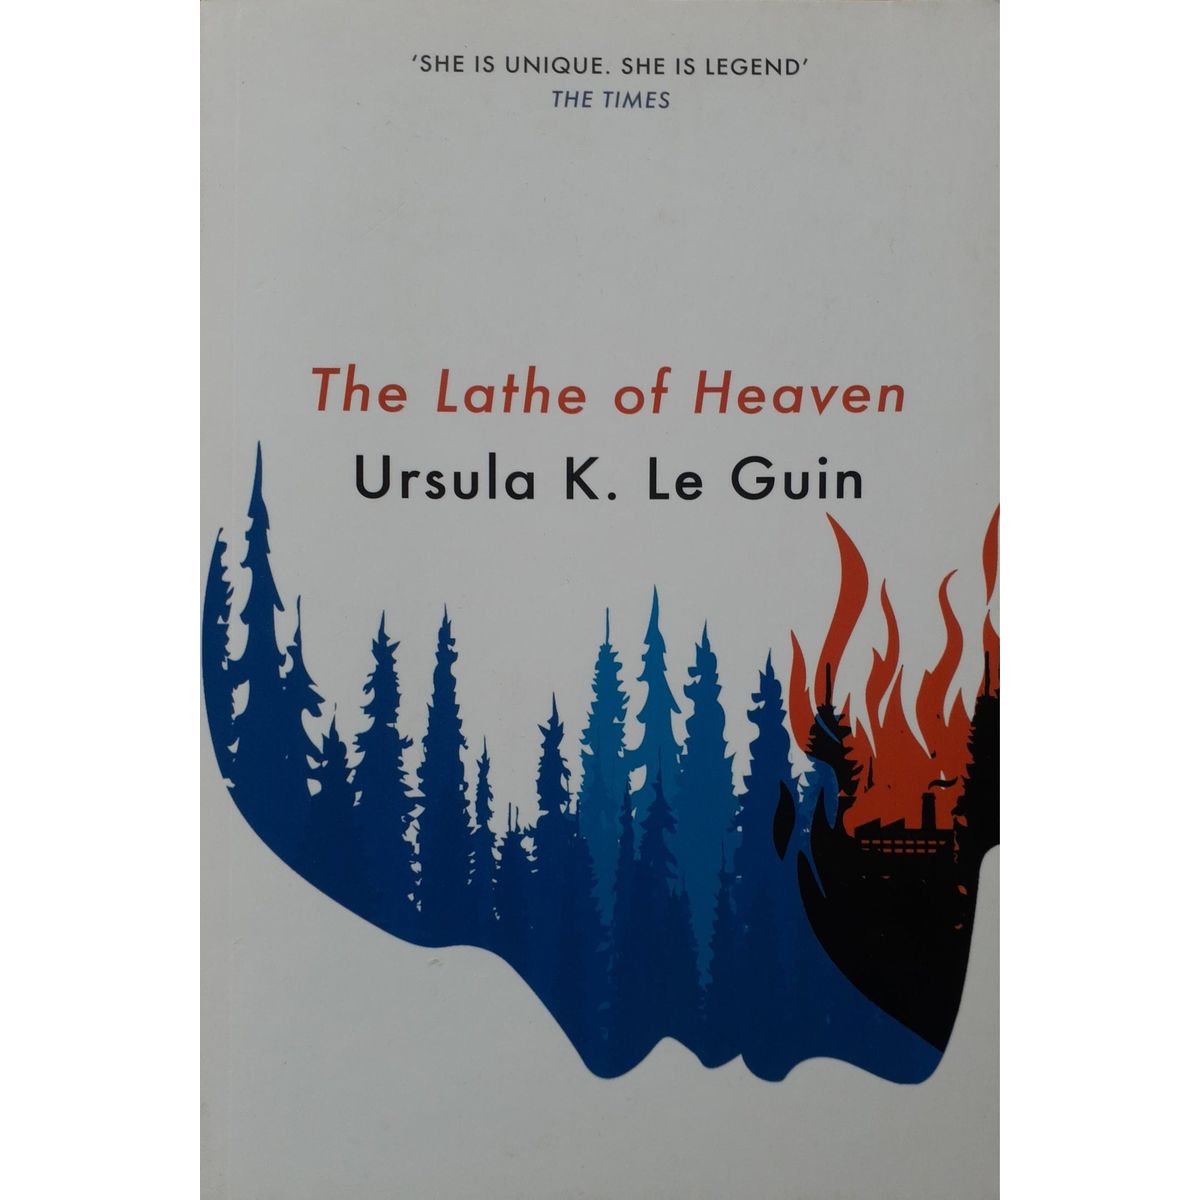 ISBN: 9781473234178 / 1473234174 - The Lathe of Heaven by Ursula K. Le Guin [2021]